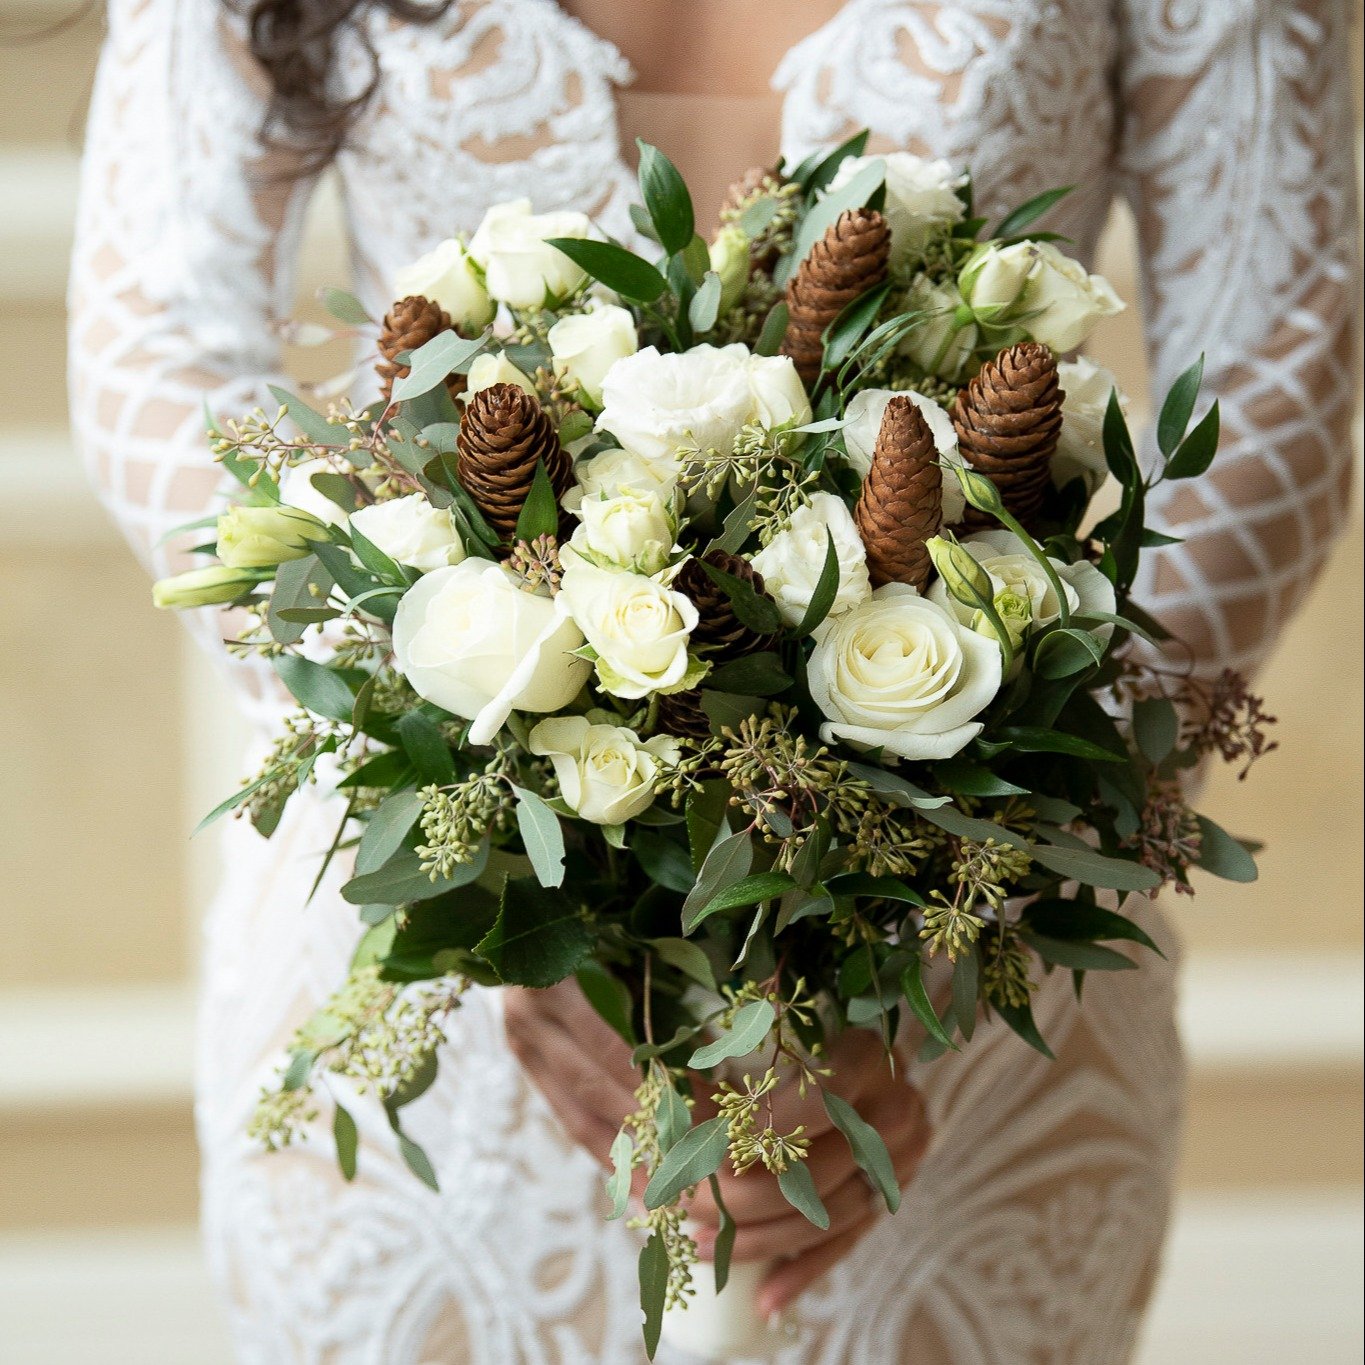 Bride holding her bouquet | Lotus Wedding Photography 